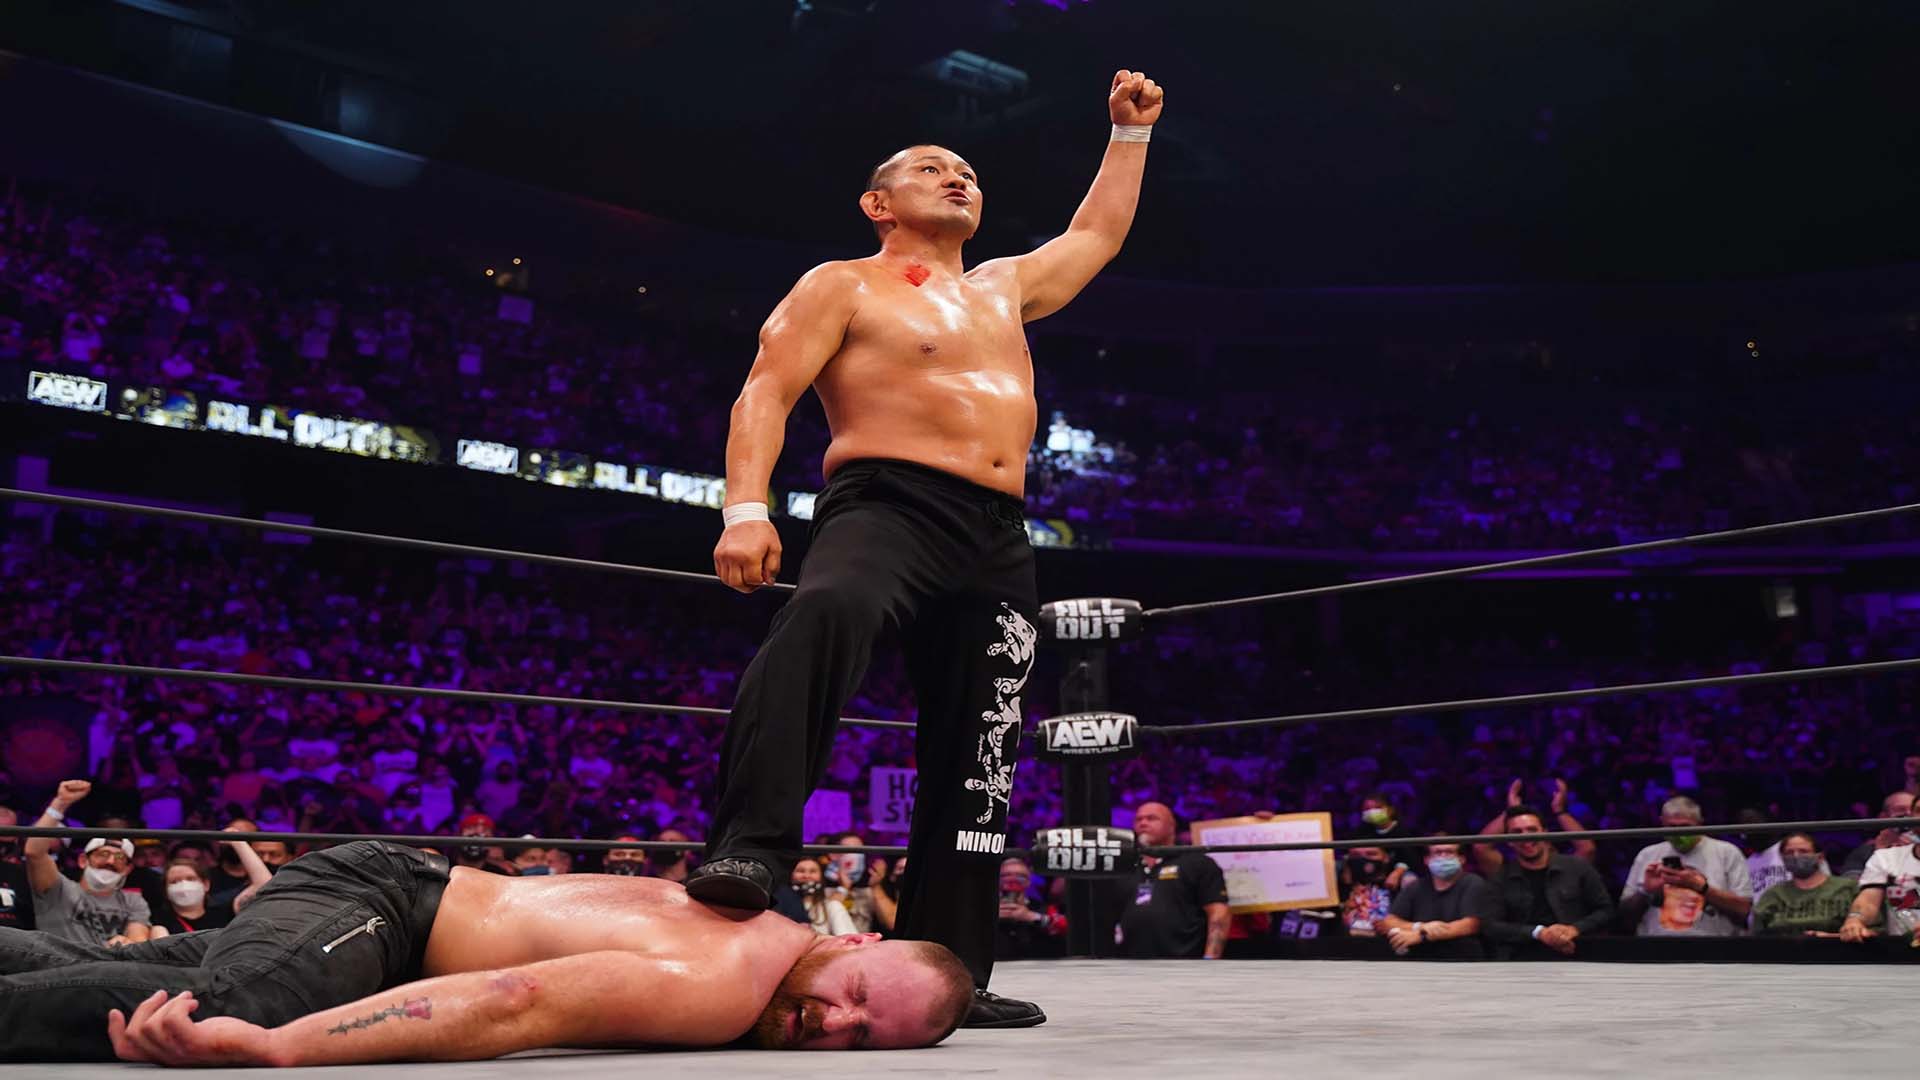 It's crazy that we live in a world where Minoru Suzuki can just show up on AEW. Kaze Ni Nare indeed! (Photo: AEW)